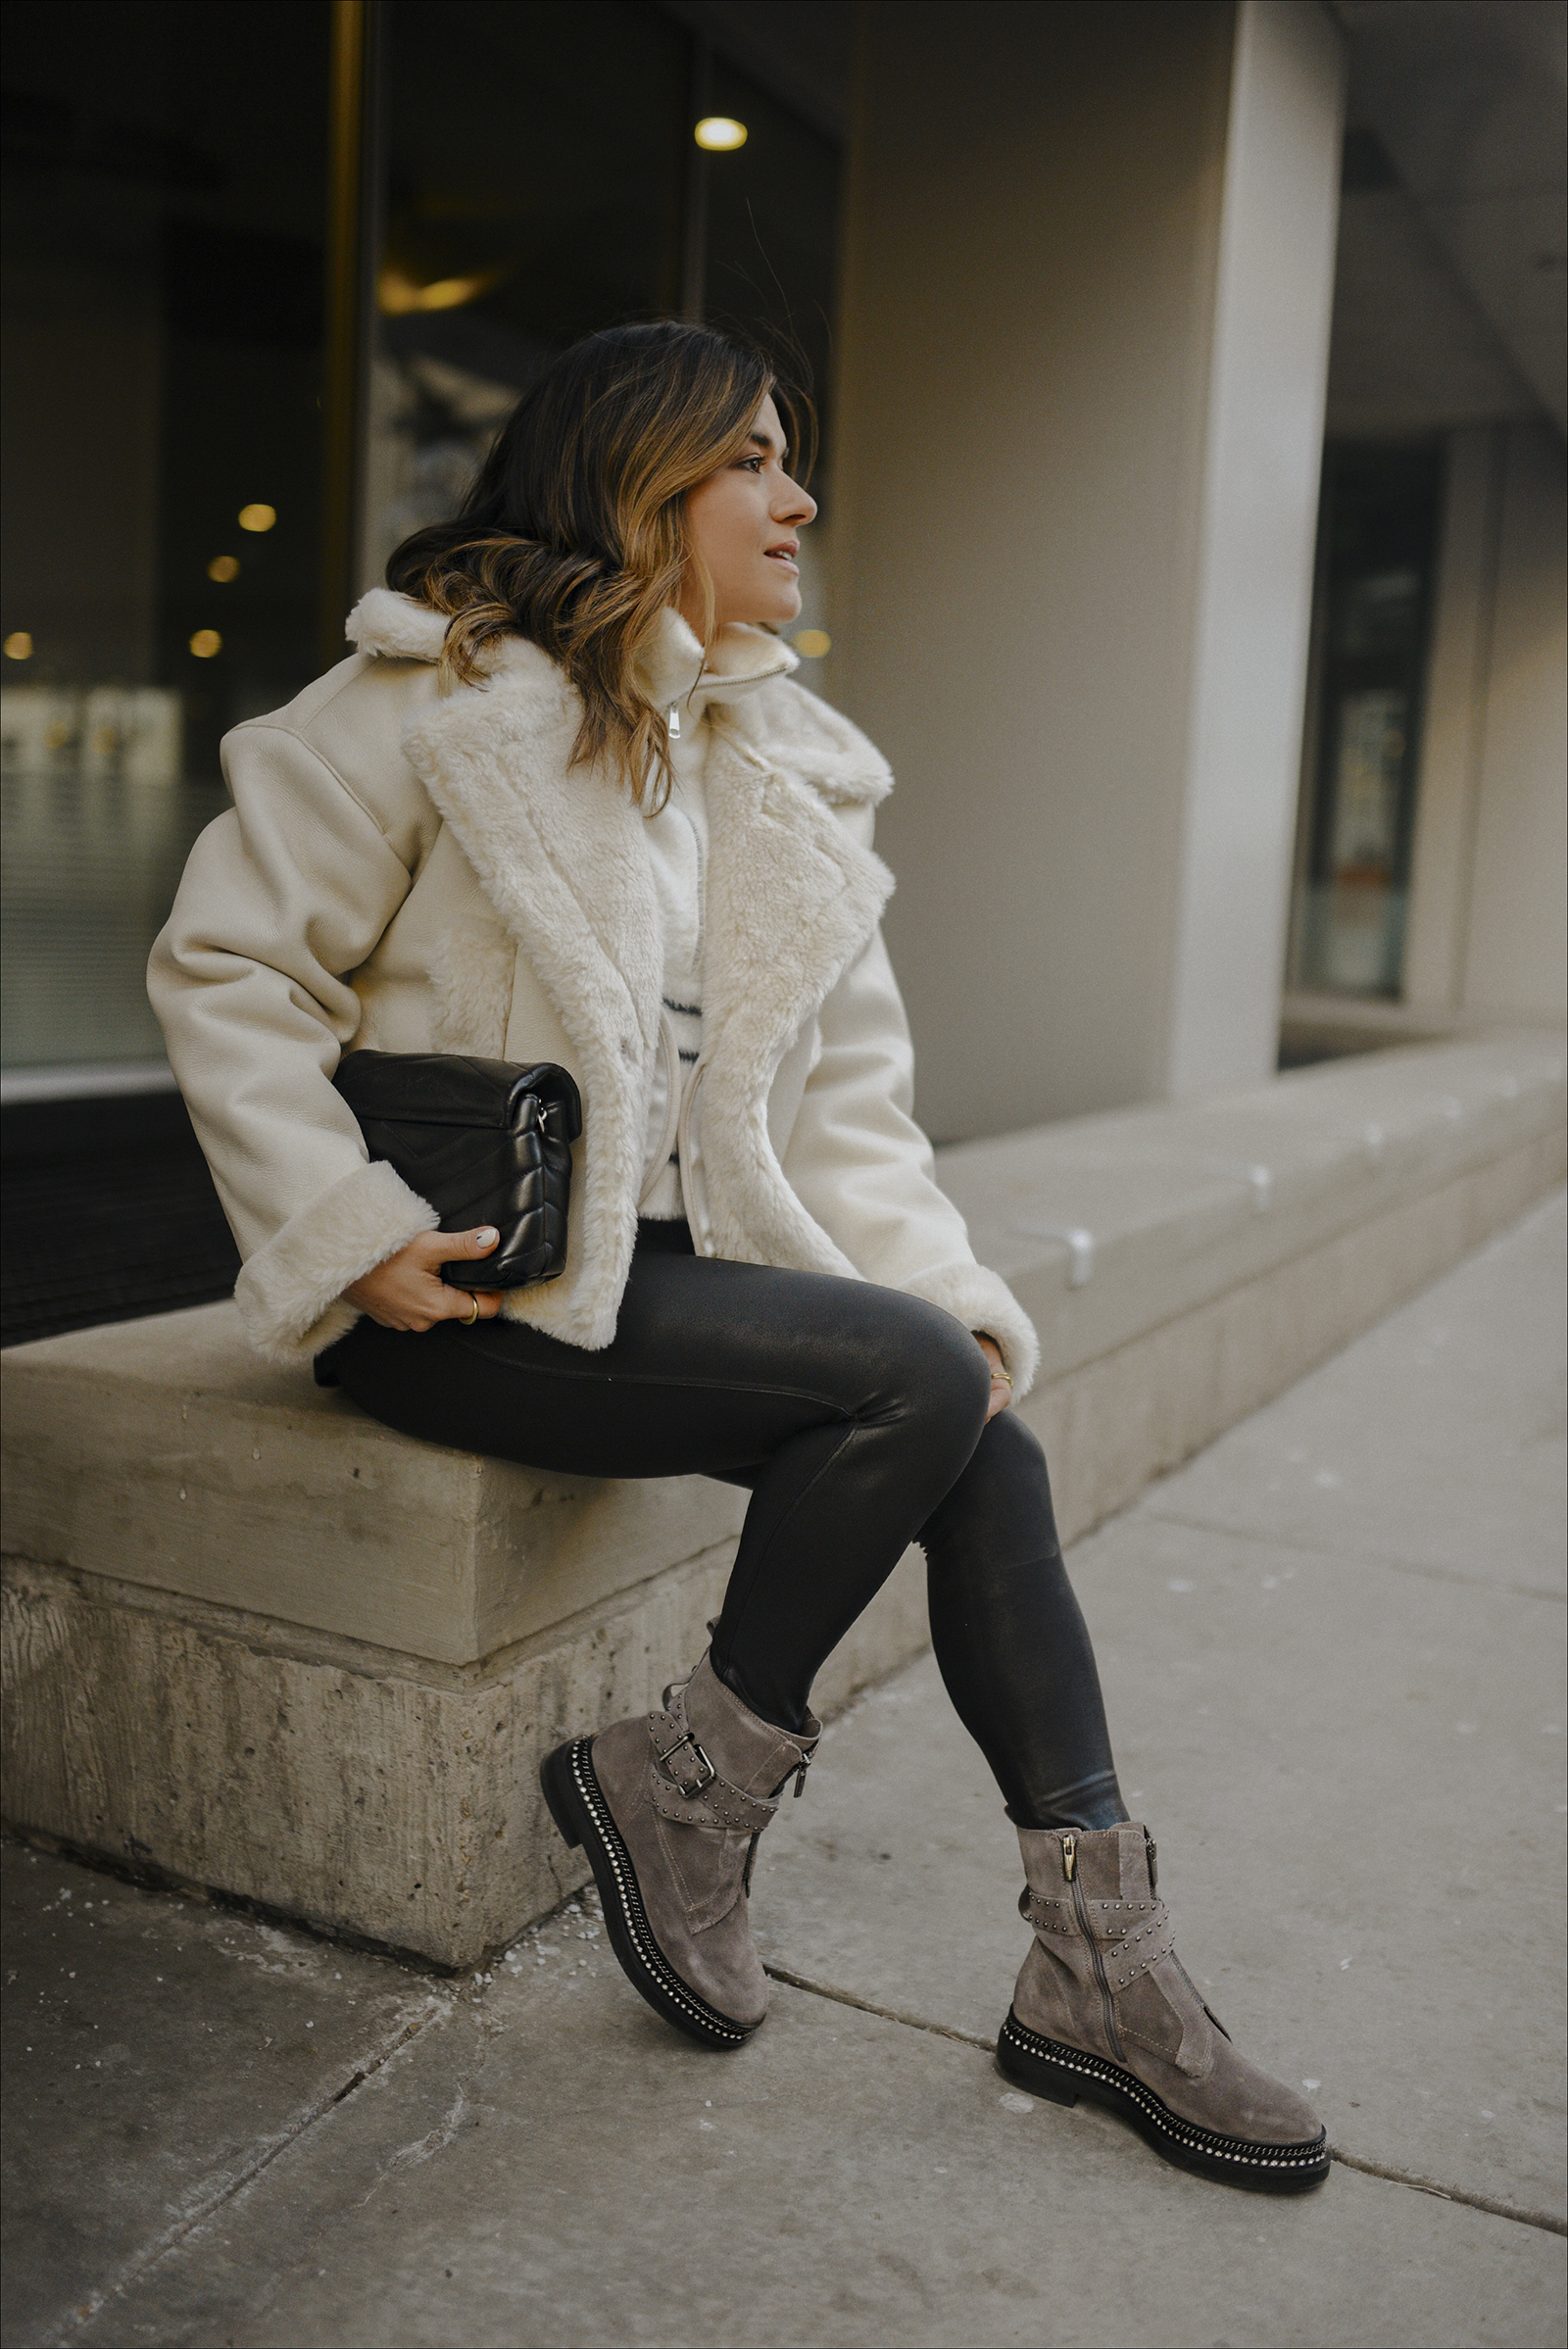 Carolina Hellal of Chic Talk wearing an Abercrombie Sherpa Lined Coat, Spanx faux leather leggings, Vince Camuto suede chunky boots and Yves Saint Laurent black crossbody bag